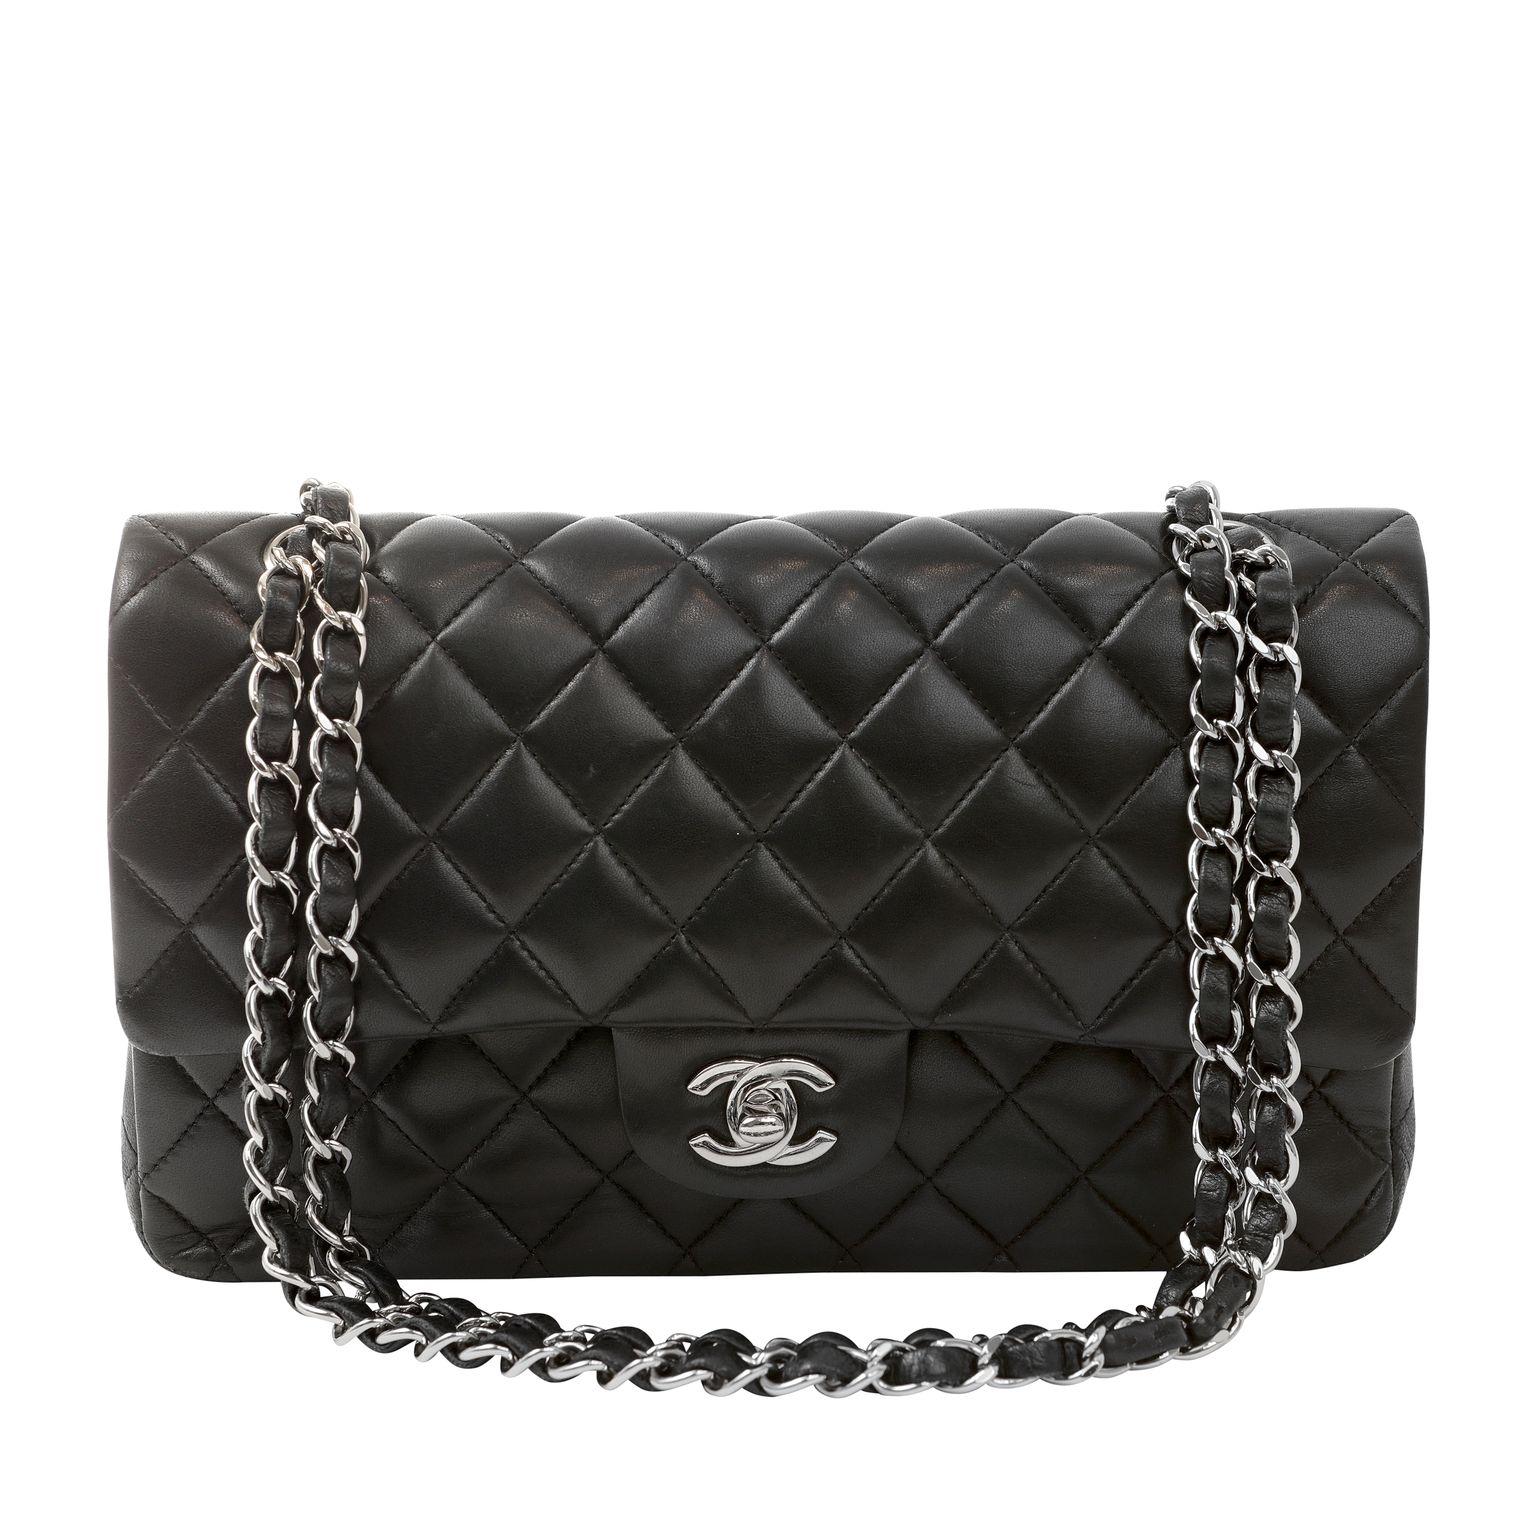 Women's Chanel Black Lambskin Medium Classic Flap Bag  with Silver Hardware For Sale